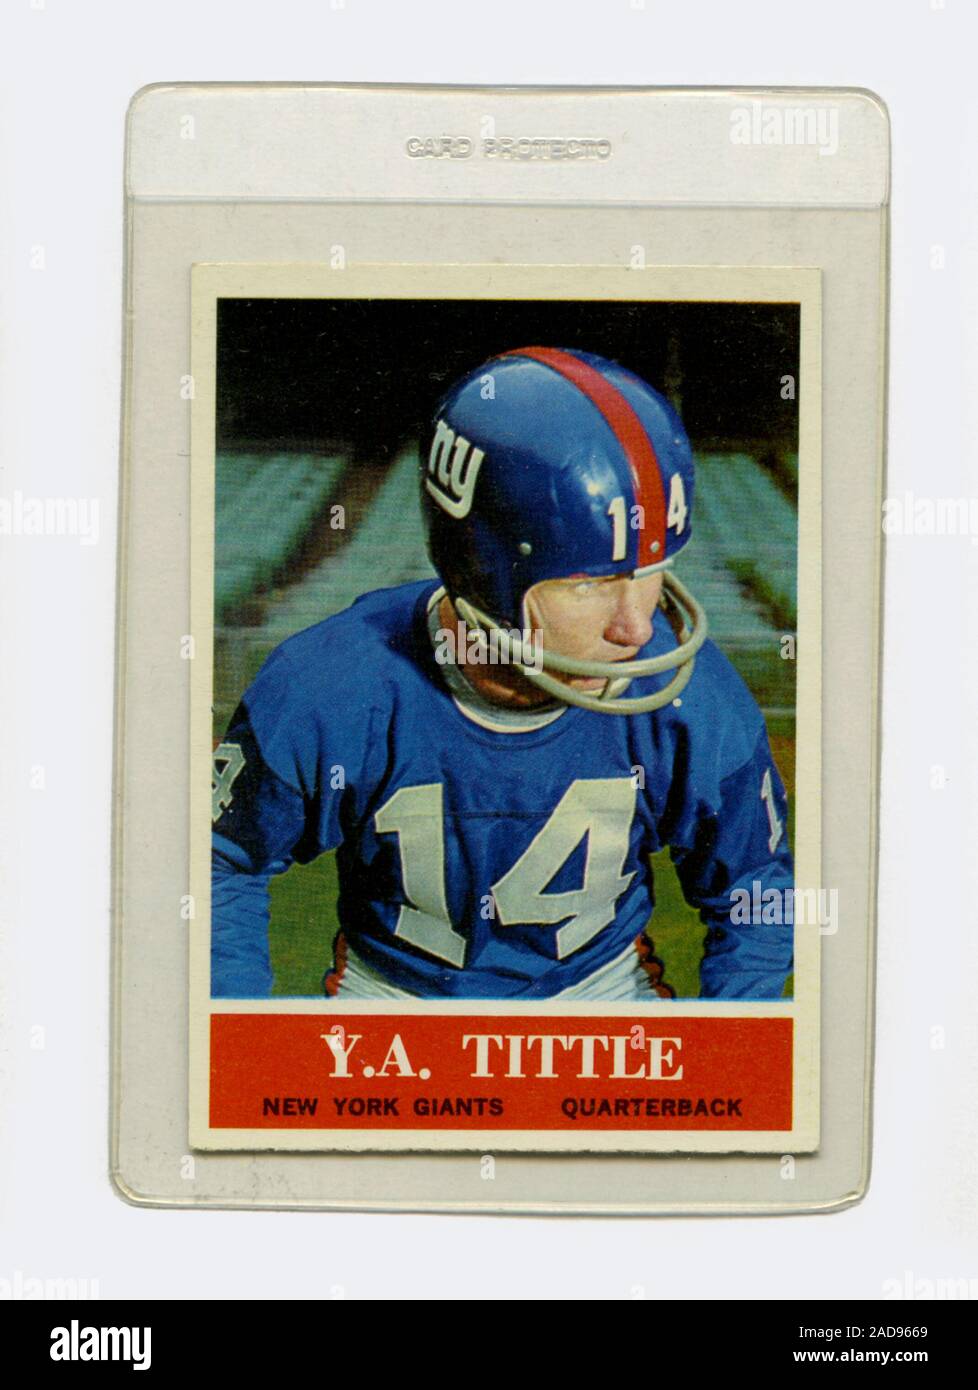 Vintage football card of Y.A. Tittle, quarterback for the New York Giants of the NFL, issued by Philadelphia Gum in 1964. Stock Photo